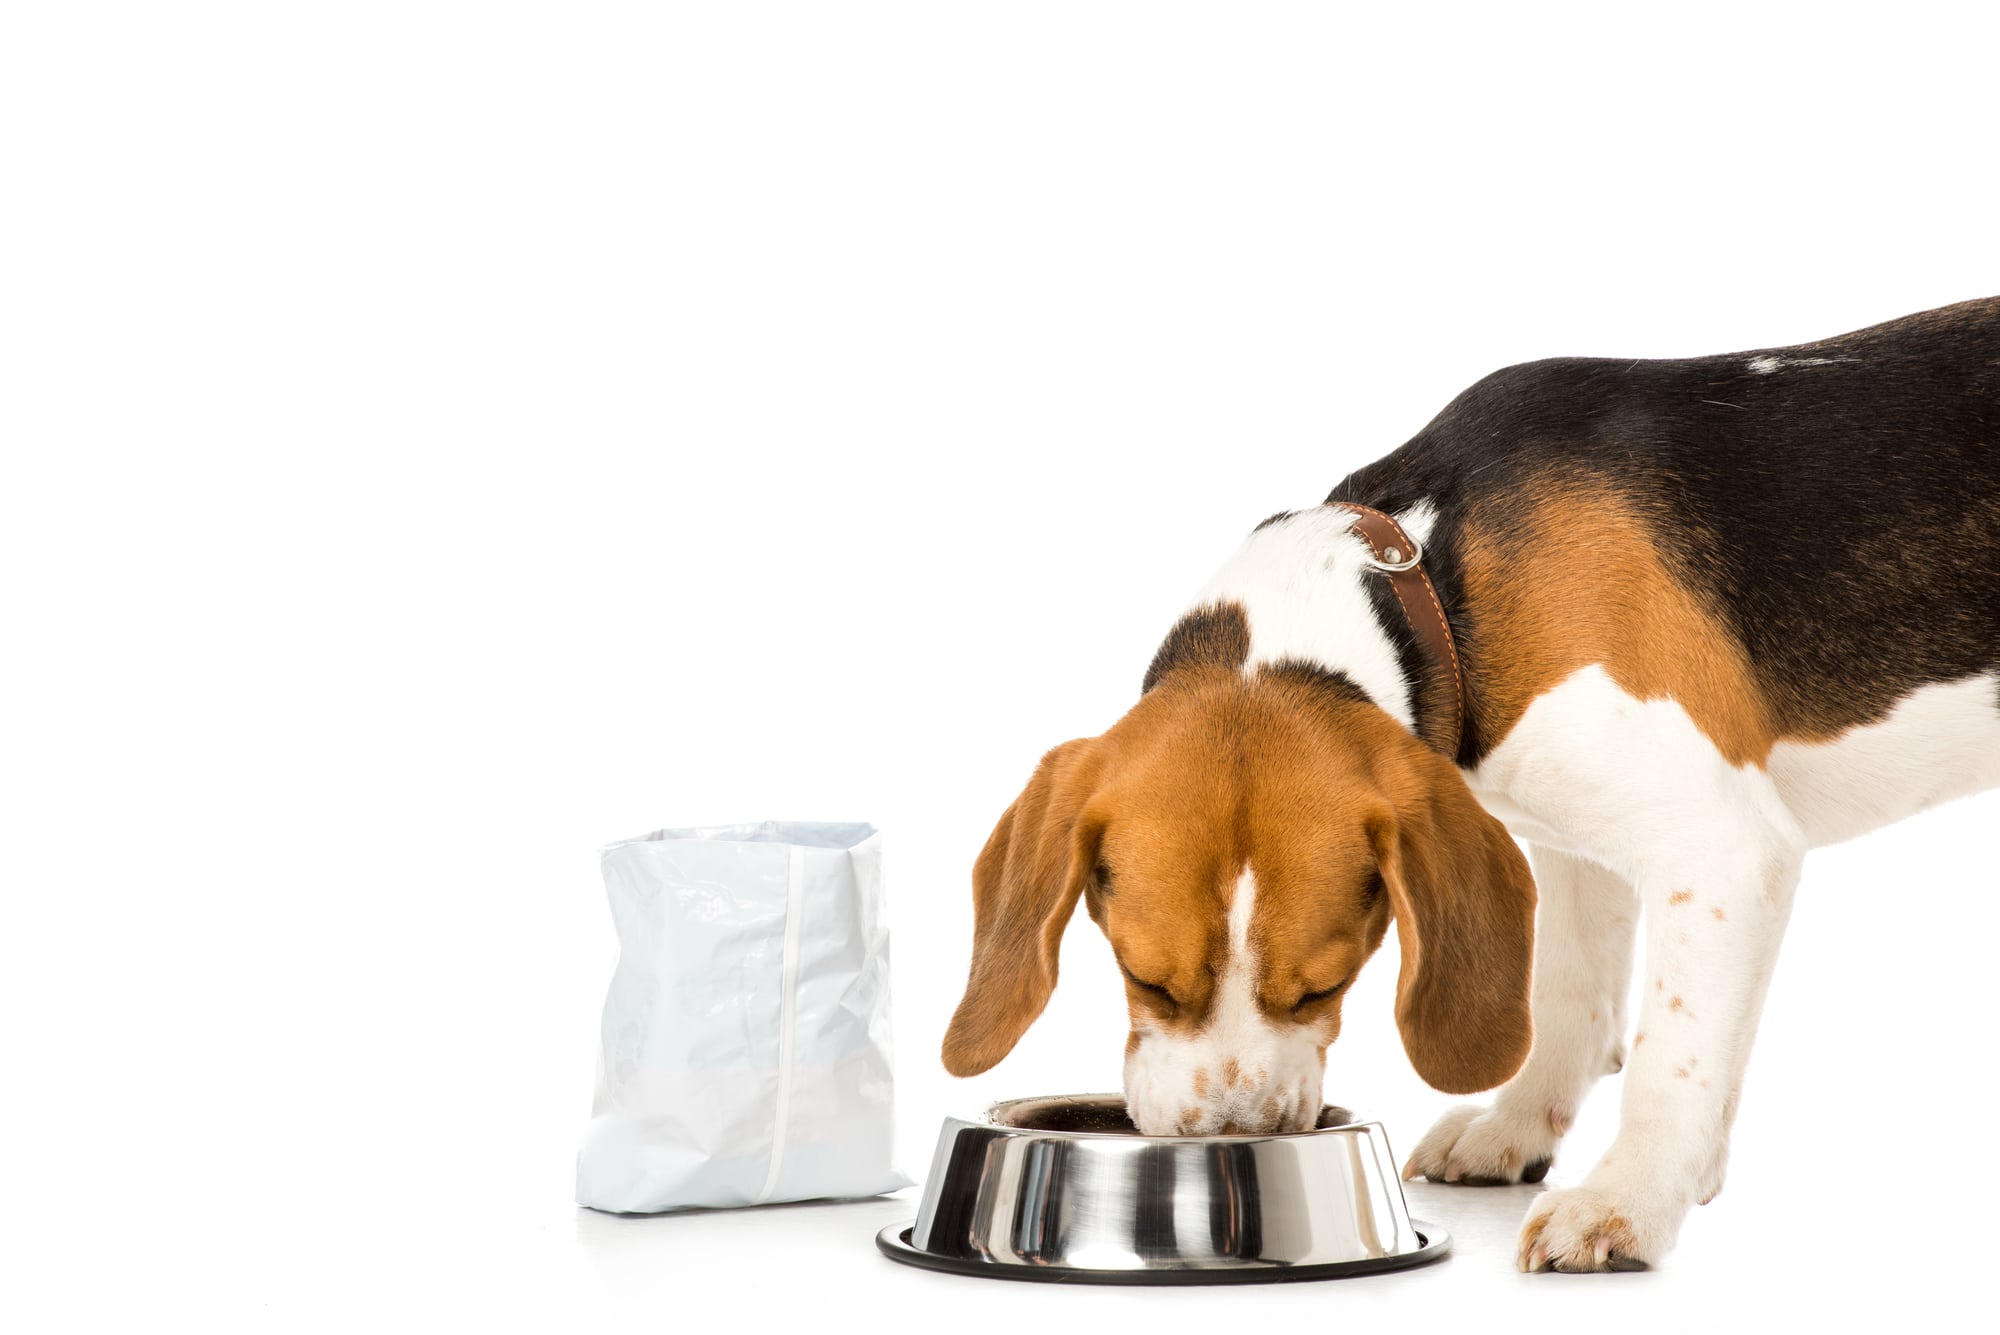 A beagle eating from its bowl.